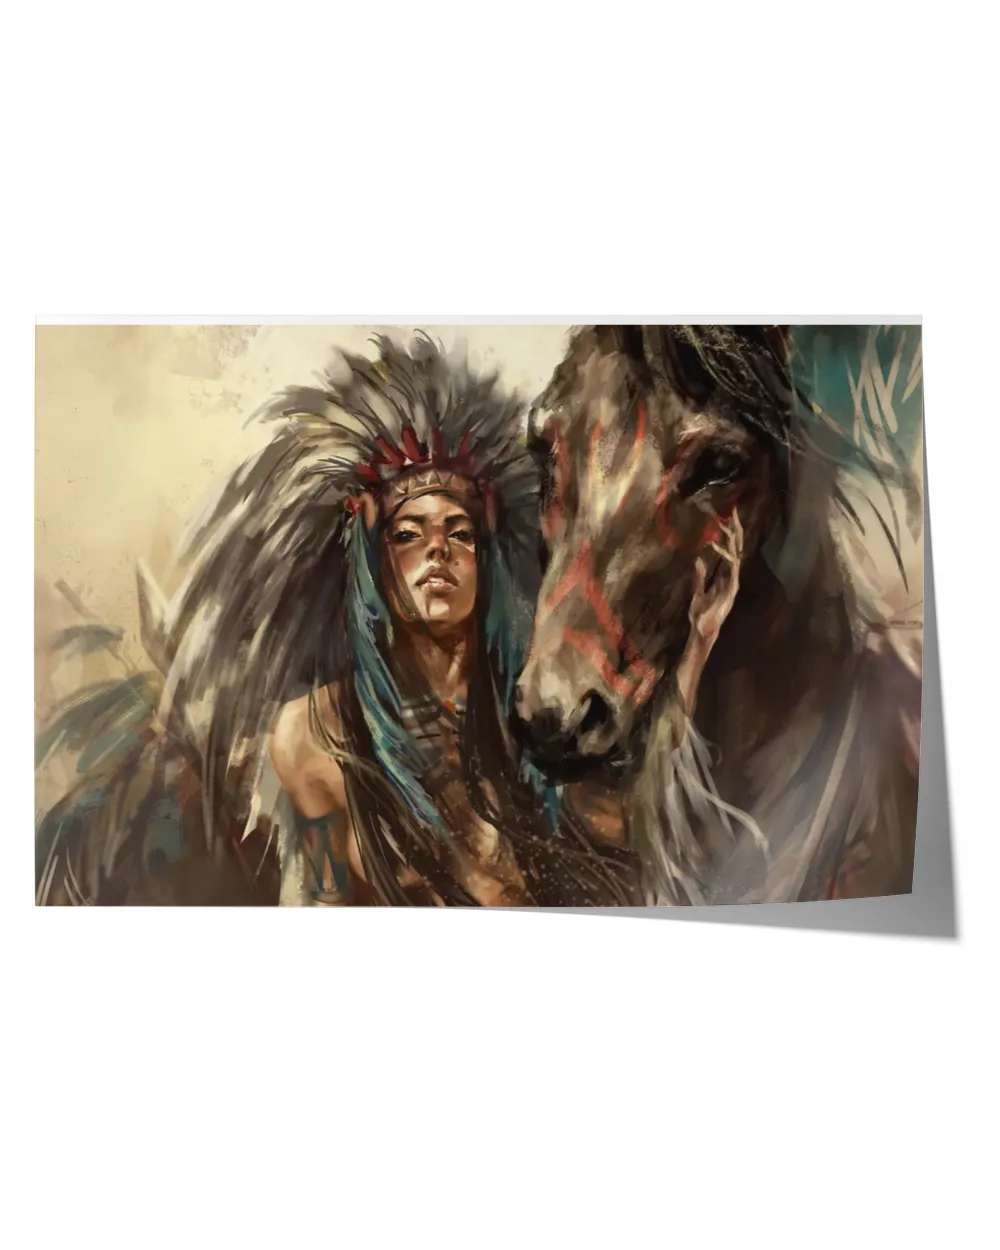 naa-jlv-45 Indian Abstract Beautiful Warrior and Horse